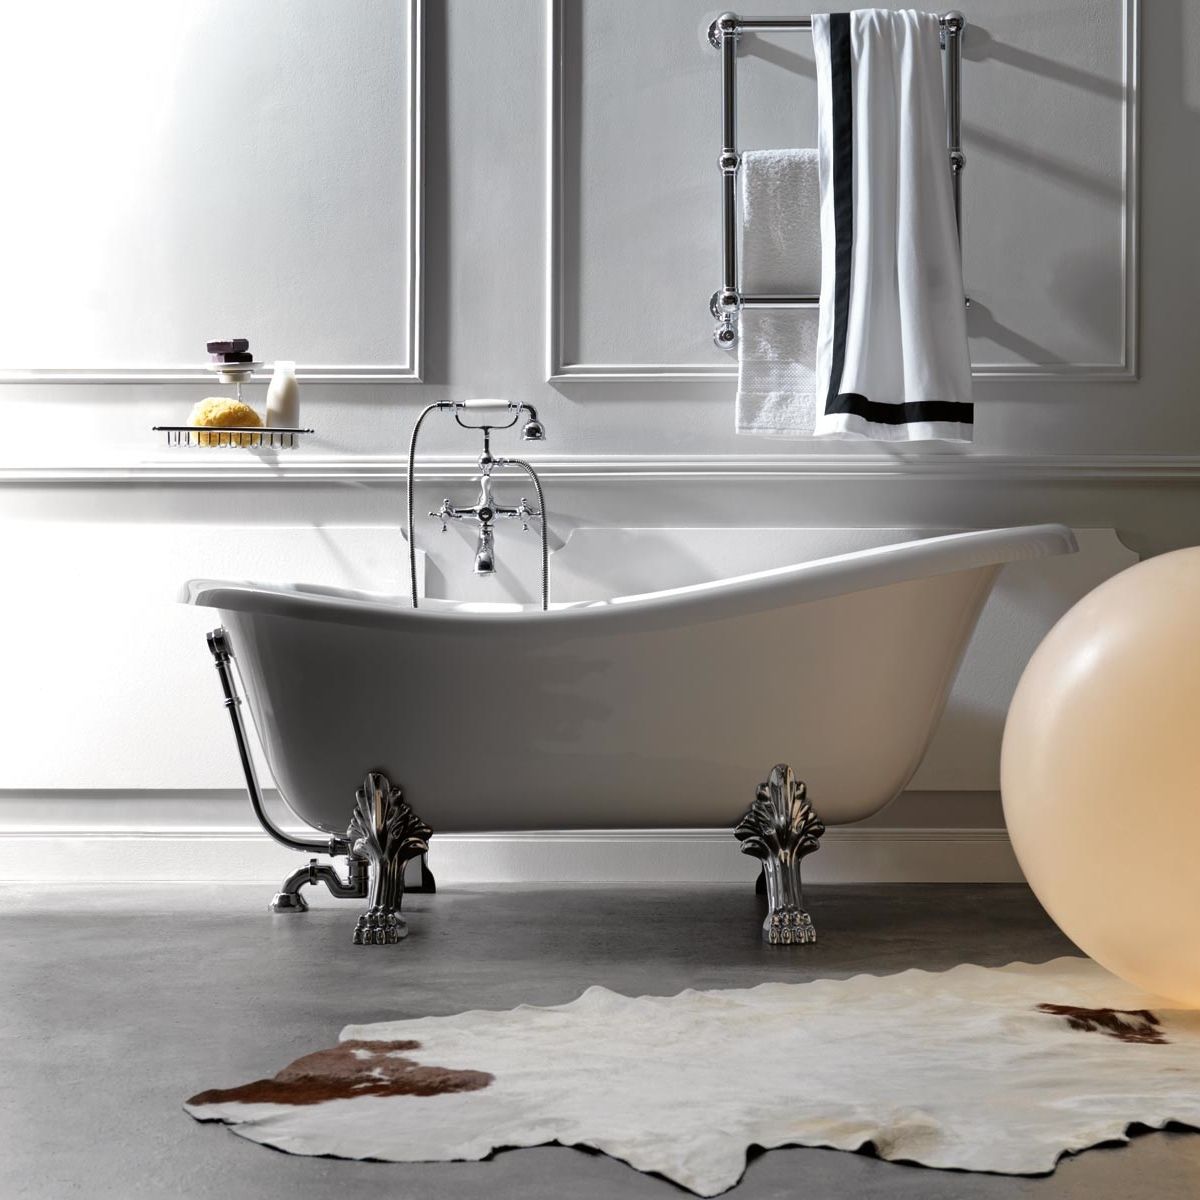 Materials Used in Bathtubs - Glass and Resin